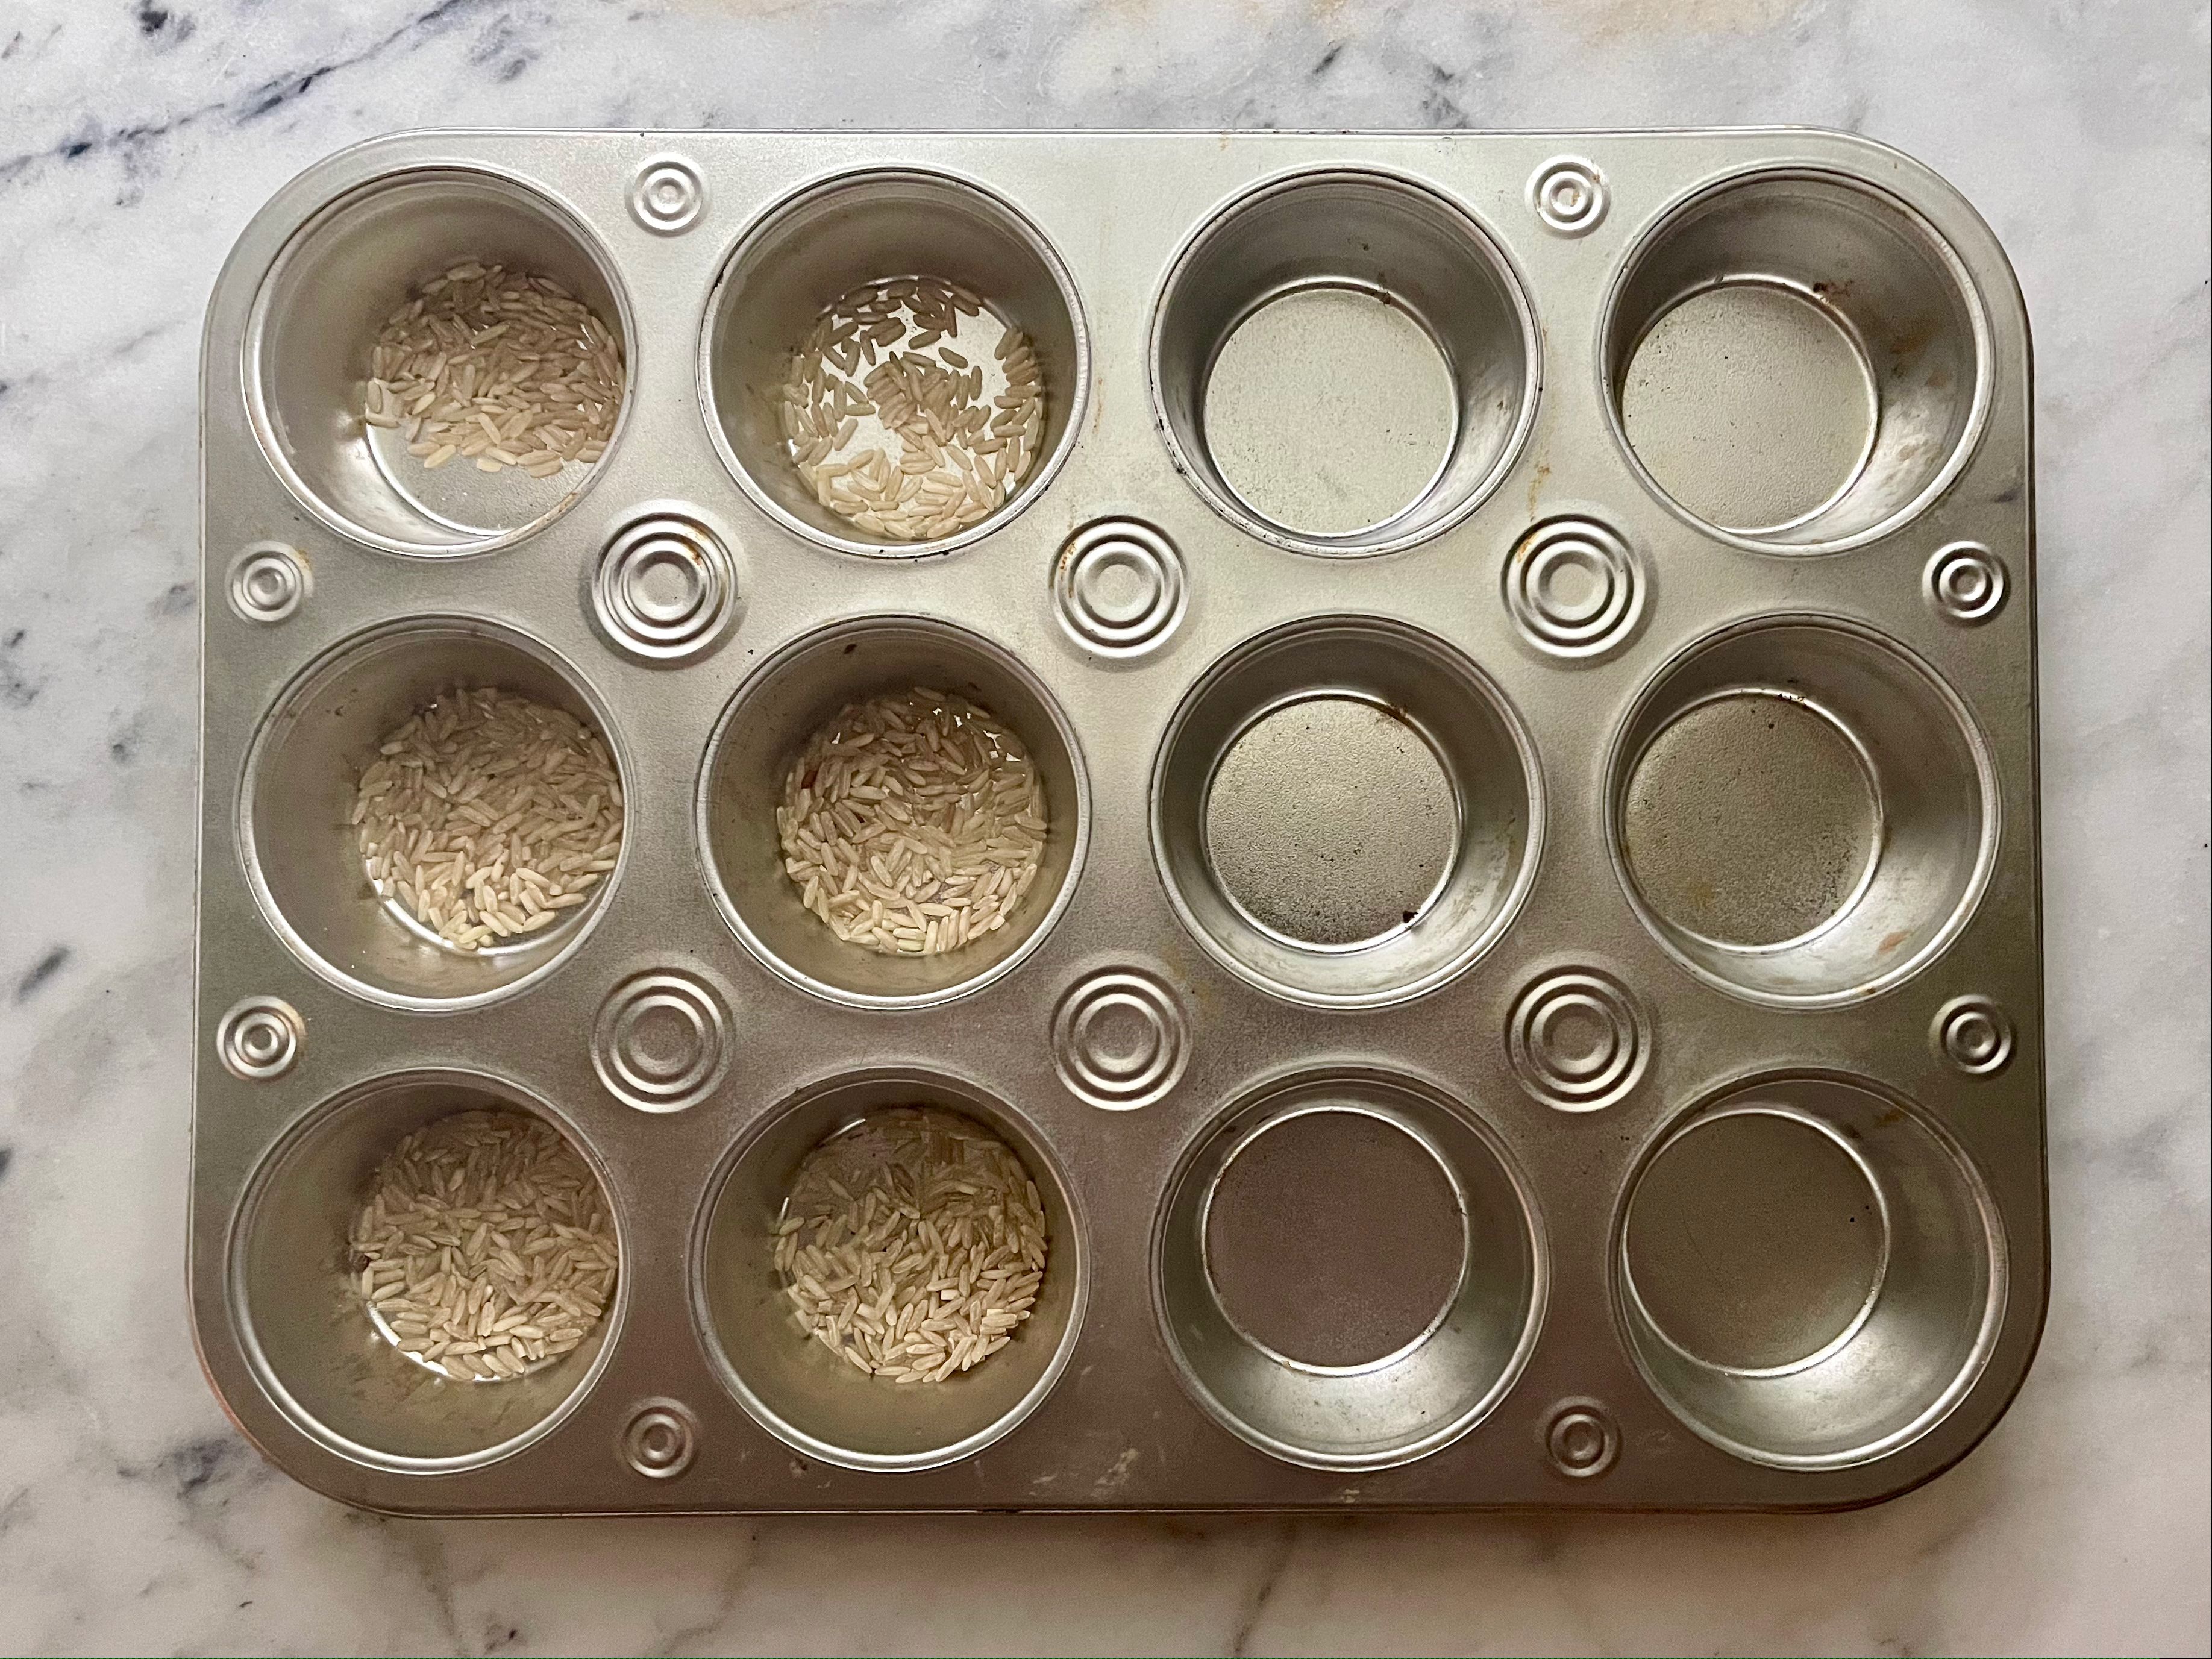 30 Muffin Tin Hacks You Need to Try — Eat This Not That